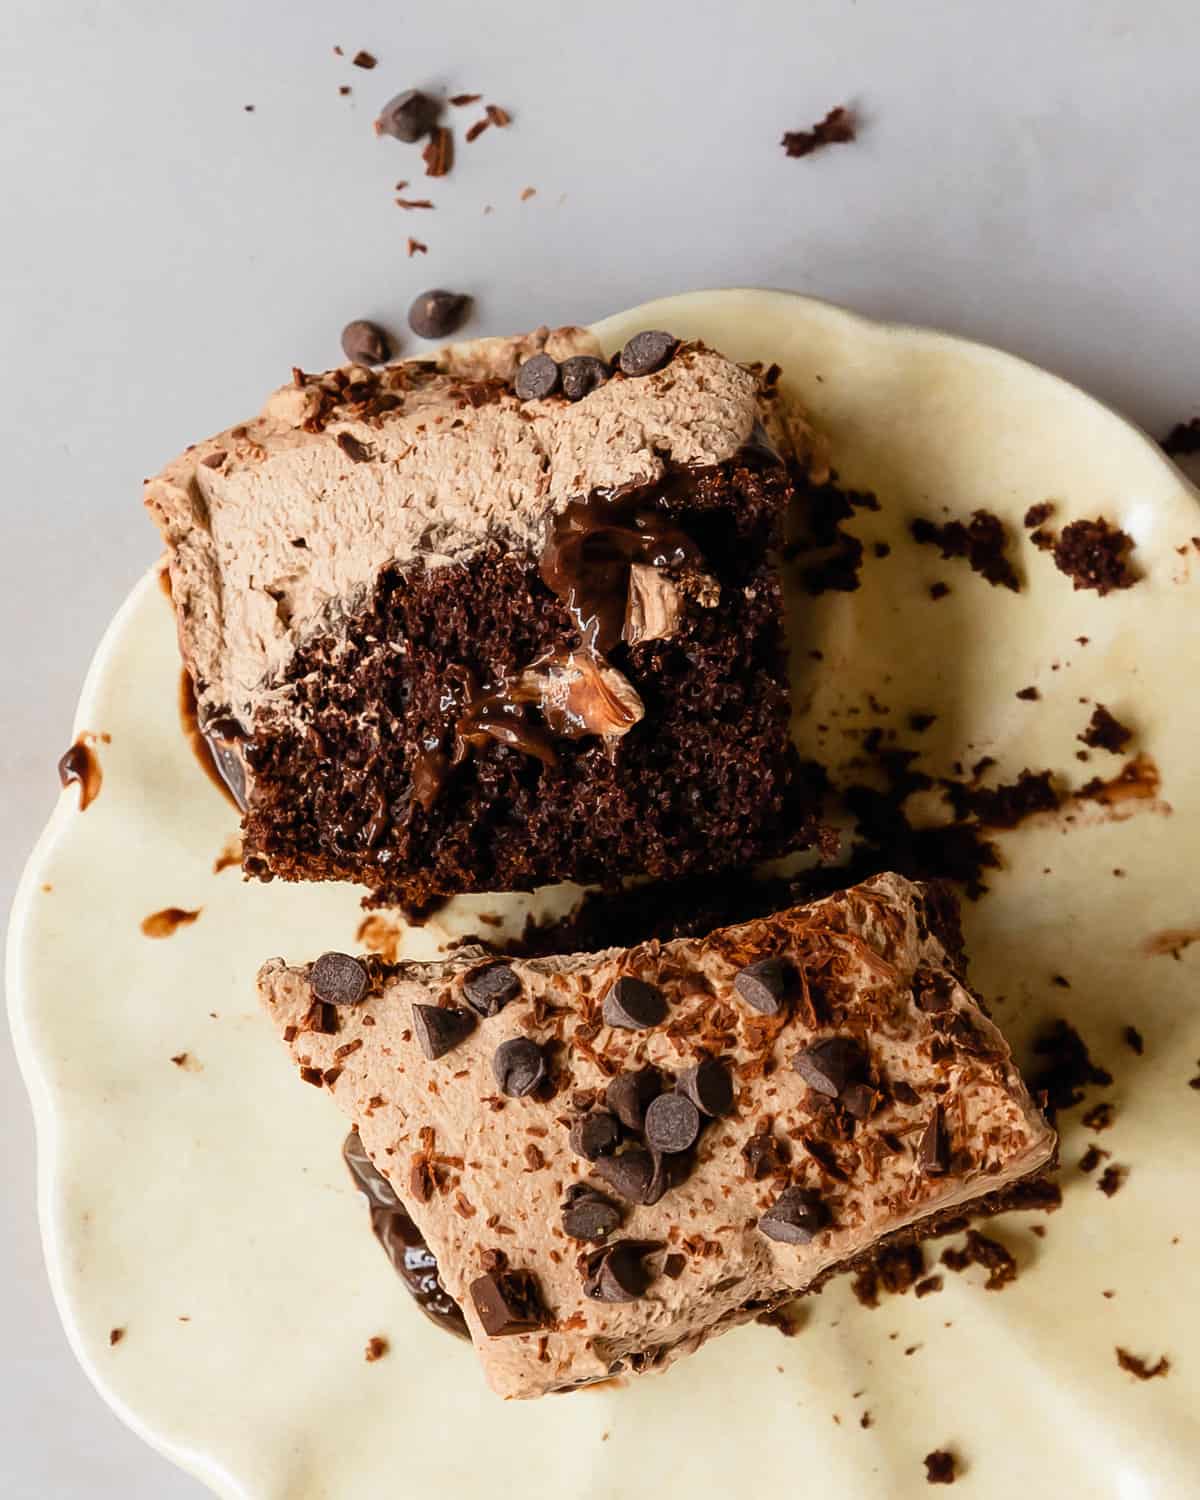 Chocolate poke cake is a decadent triple chocolate pudding cake. It’s made with moist chocolate devil’s food cake filled with a creamy chocolate pudding, layered with fluffy chocolate whipped cream and chocolate chips. This chocolate pudding cake recipe comes together quickly and easily, making this the perfect dessert for gatherings and celebrations. 